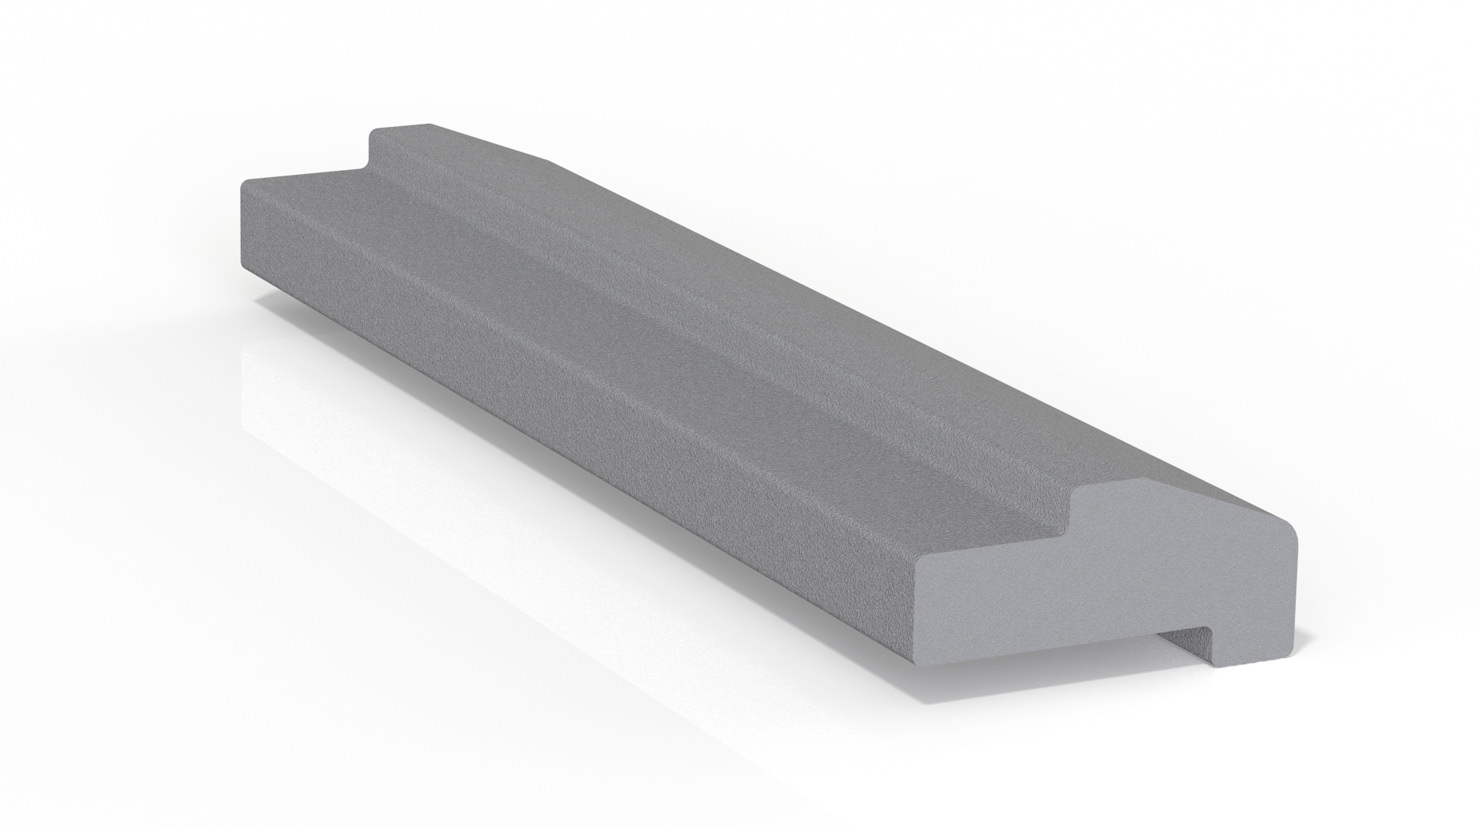 EXTRUSION DIES XPE PROFILES FOR HIGH-END INDUSTRIAL COMPONENTS